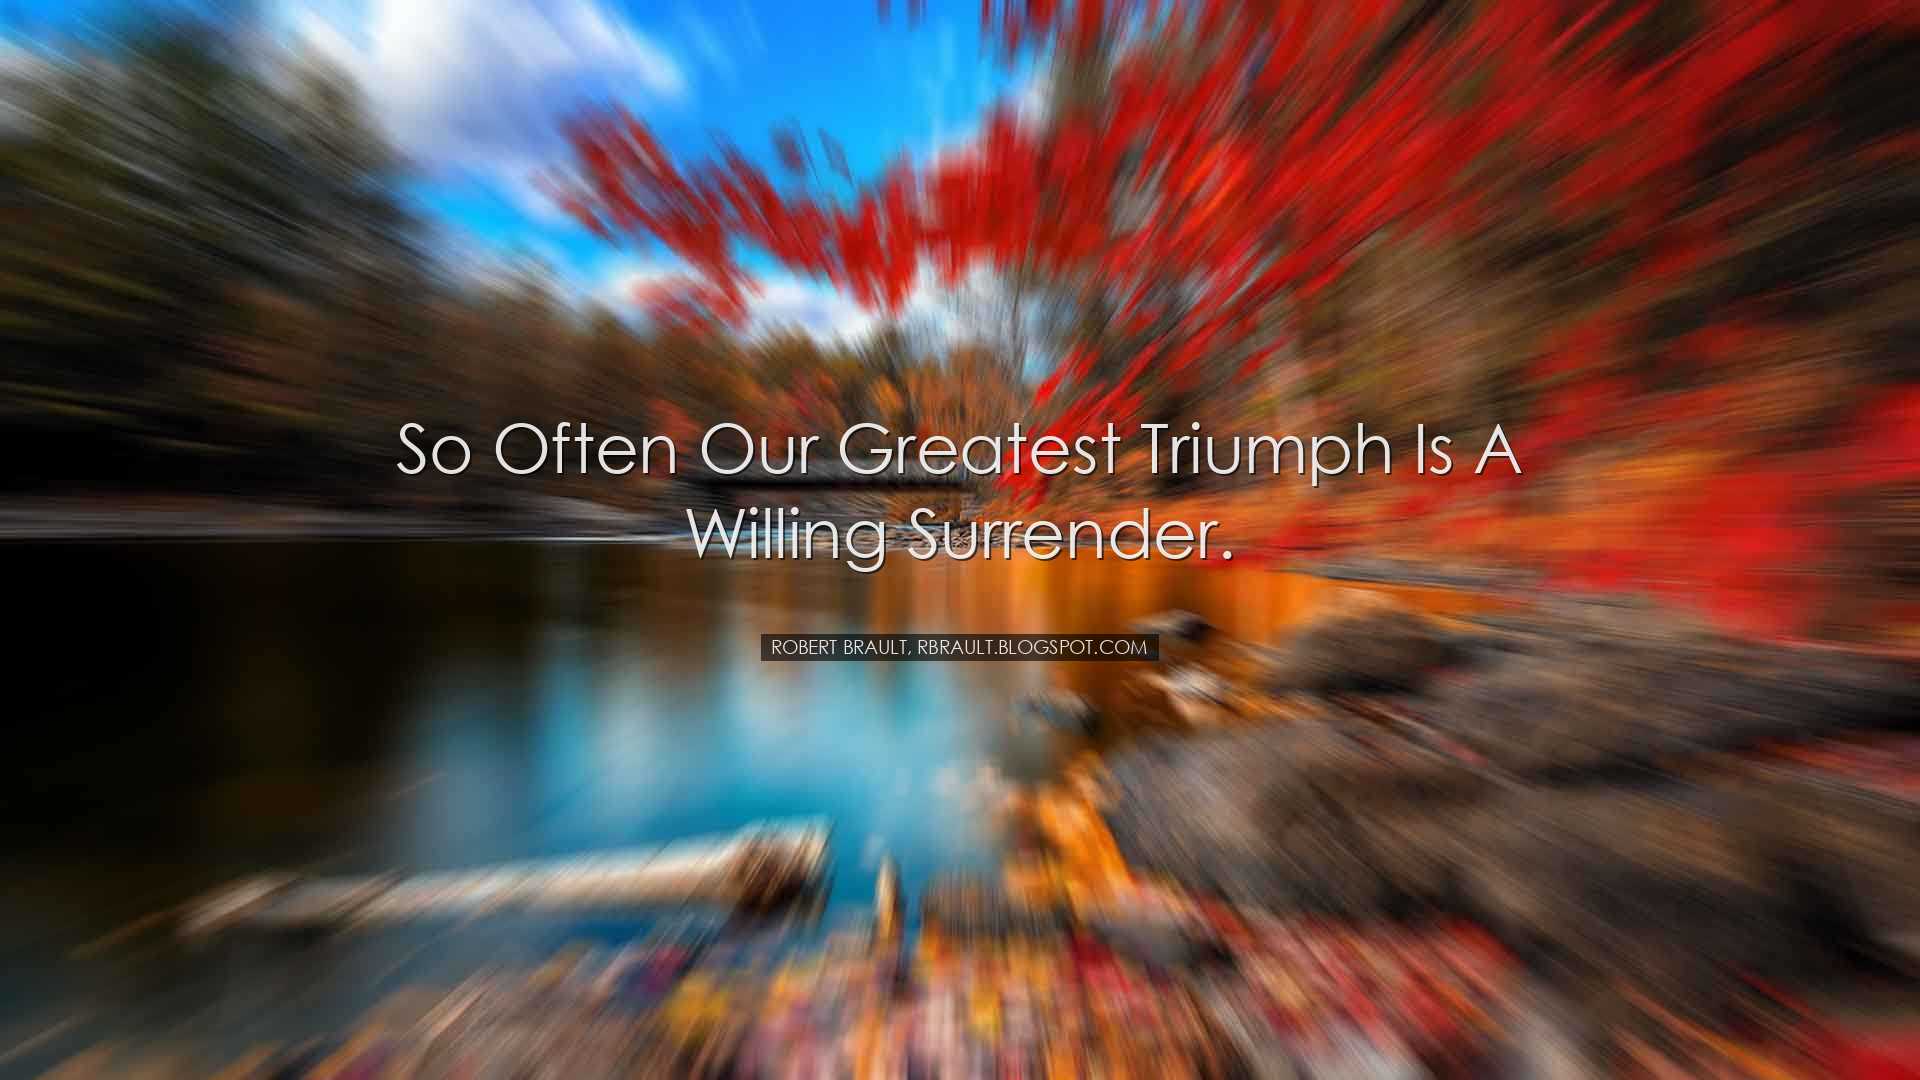 So often our greatest triumph is a willing surrender. - Robert Bra